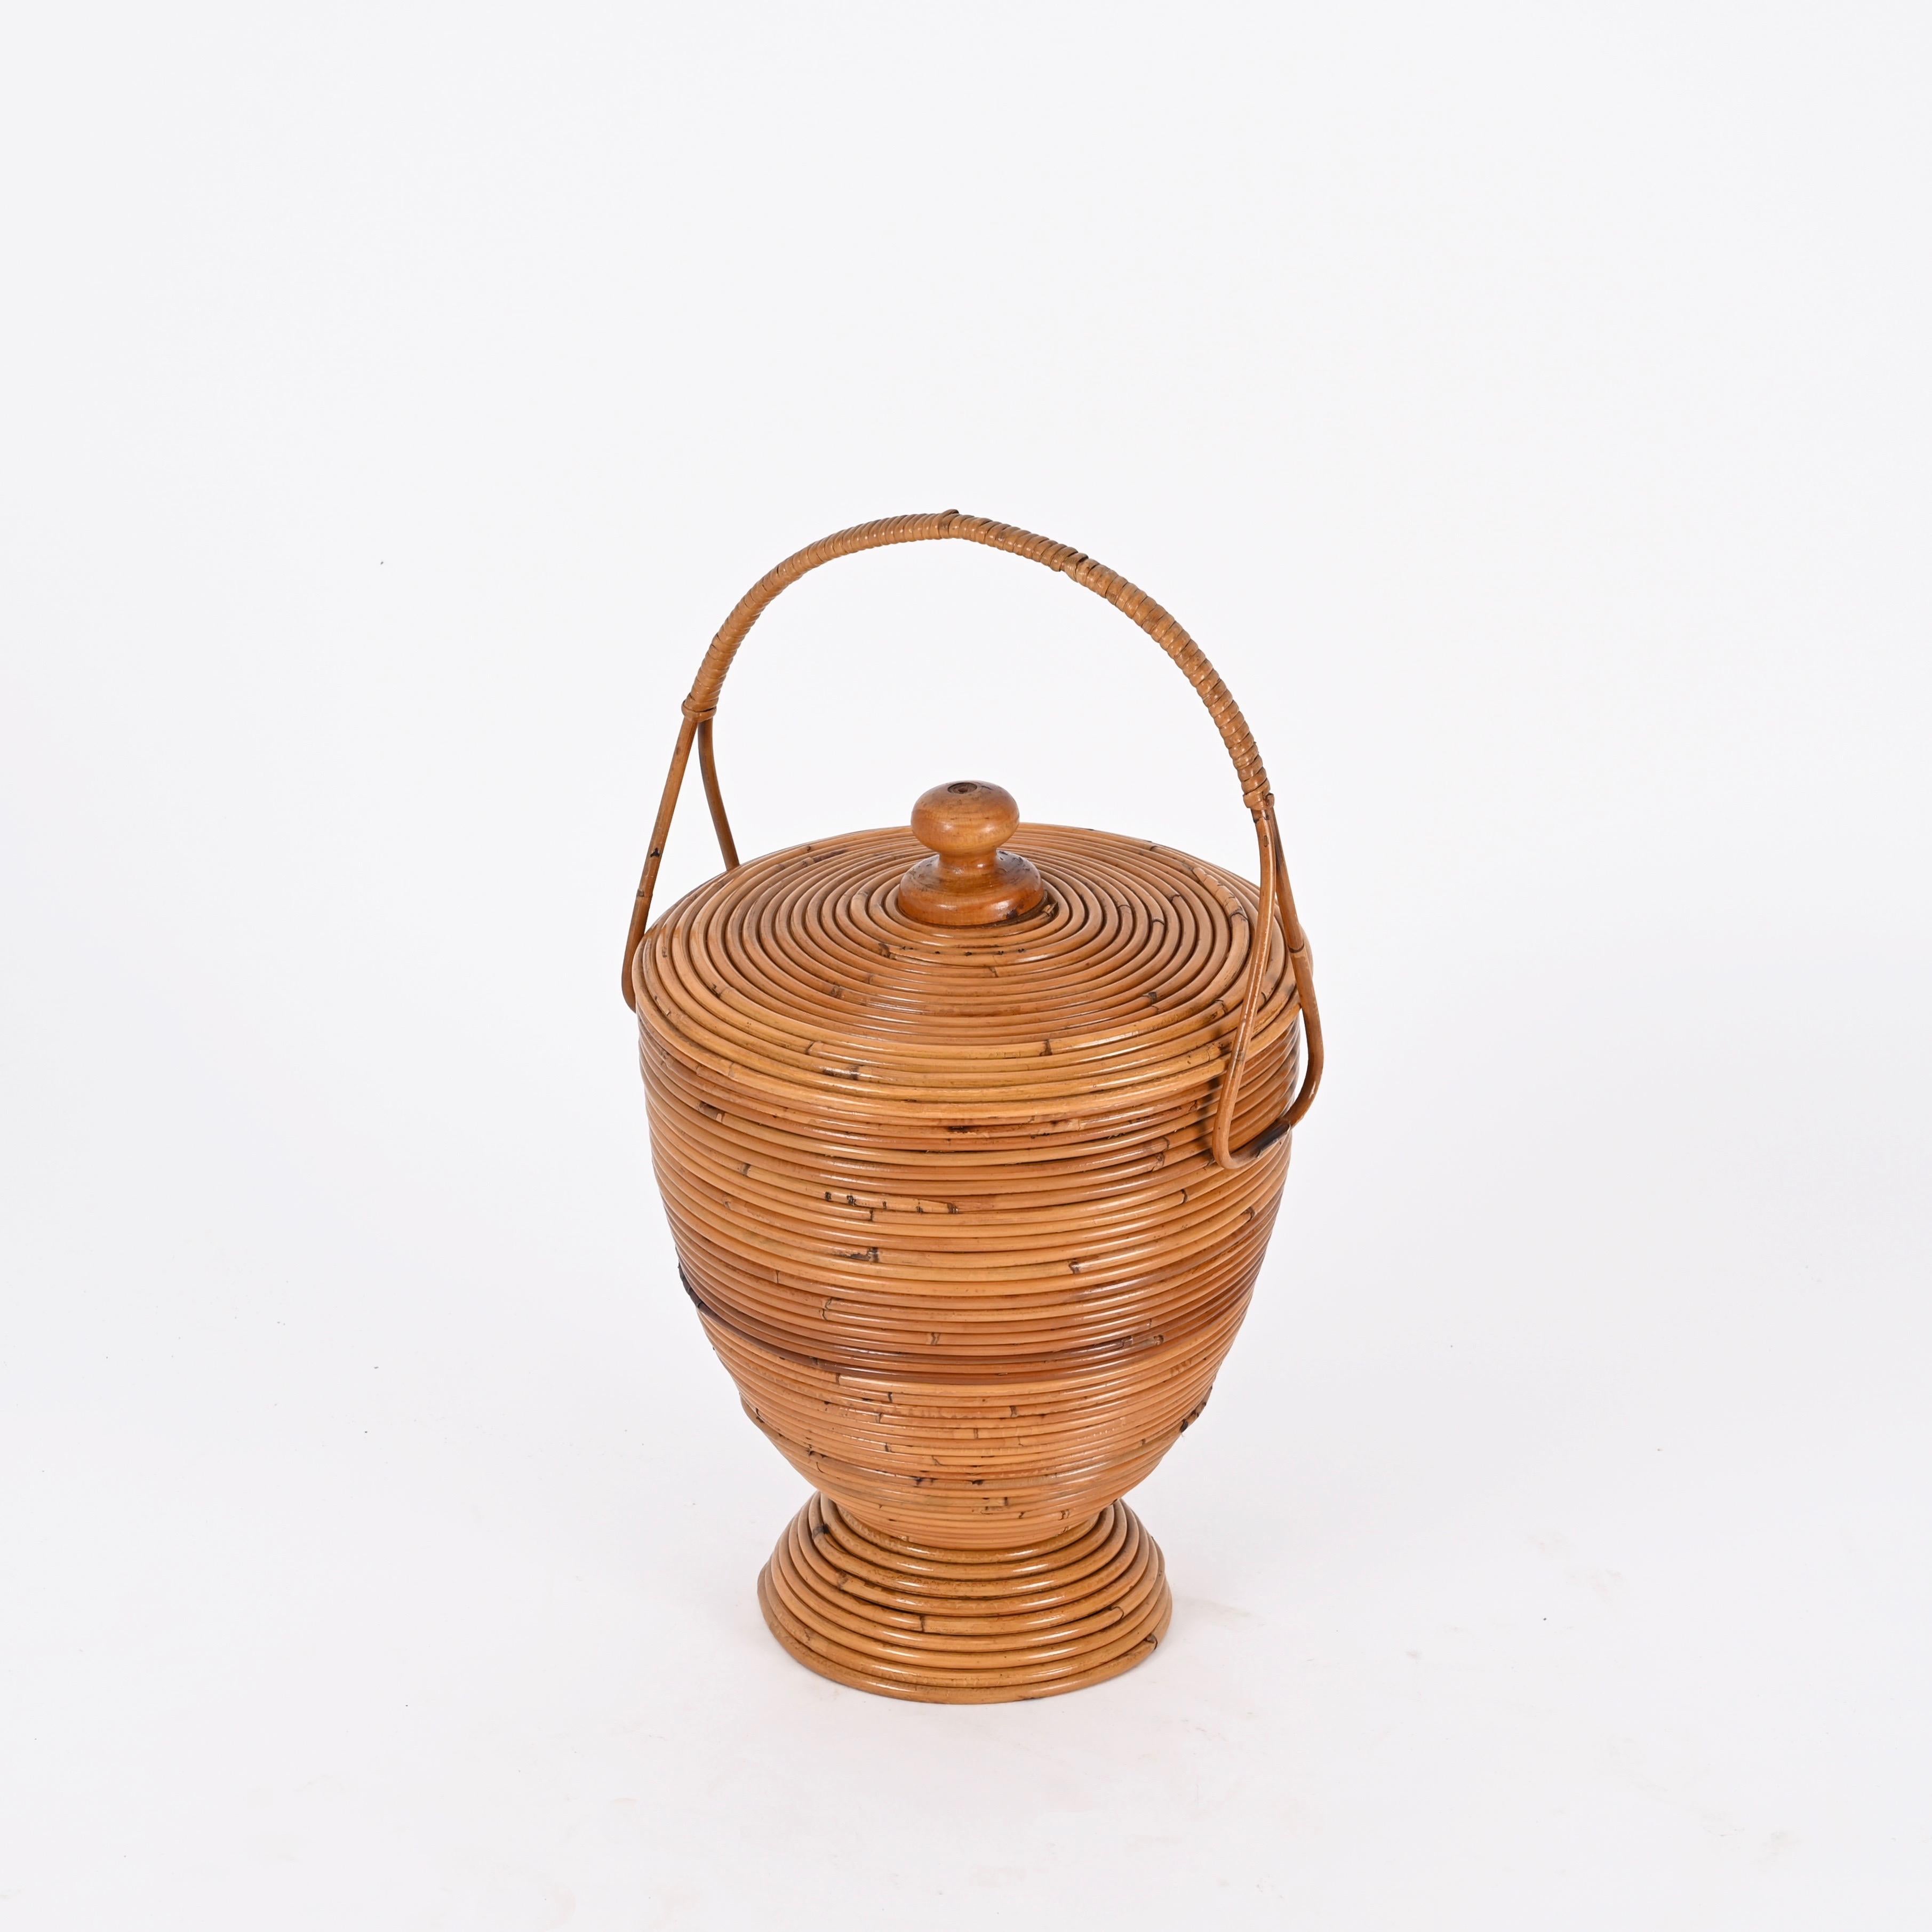 Stunning Mid-Century basket in curved rattan and wicker with a blond walnut knob. This lovely decorative basket was made by Vivai del Sud in Italy in the 1970s.

This catch-all basket is fully made in curved rattan, the handle is decorated by woven